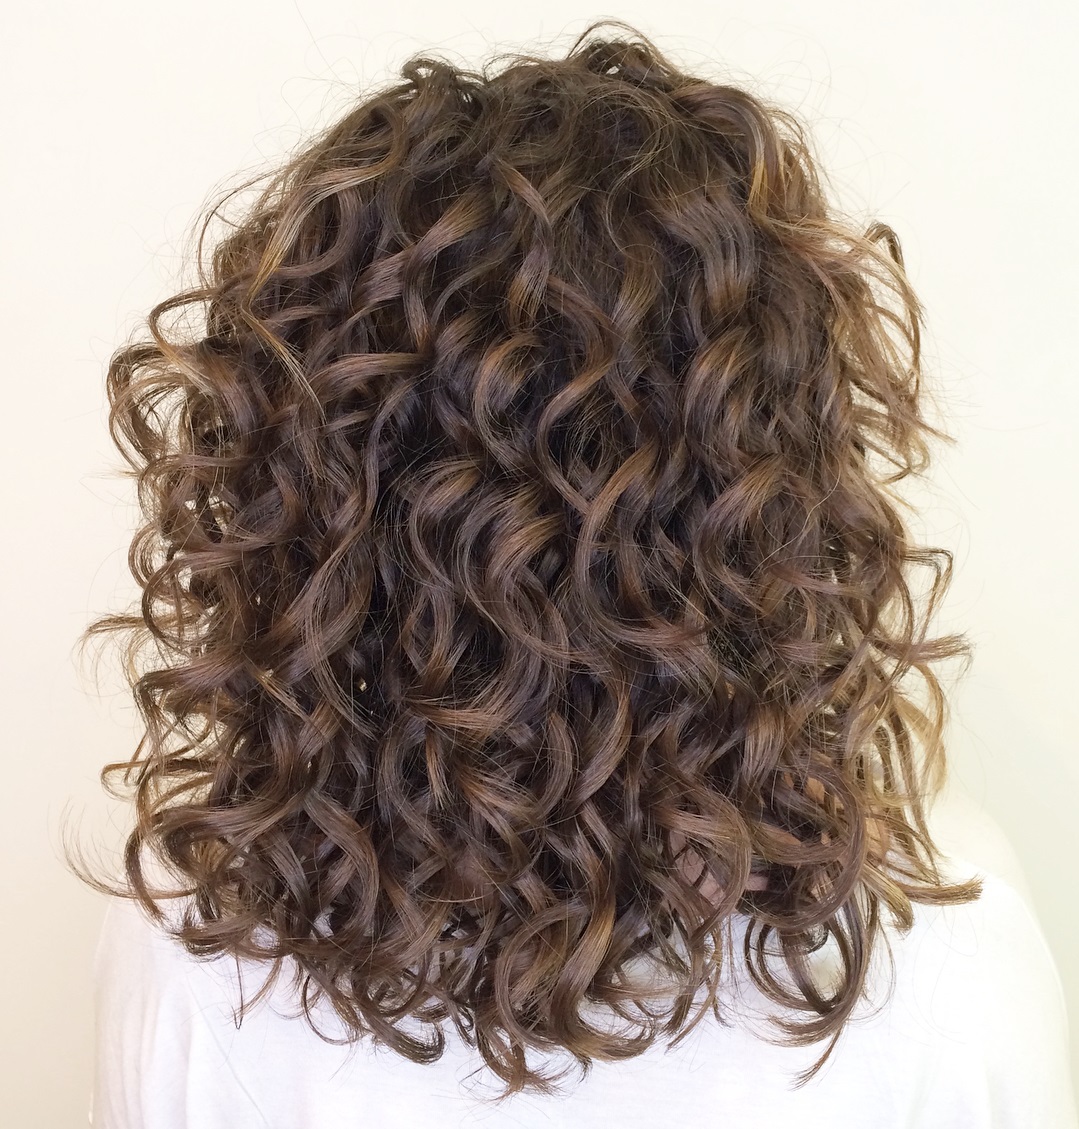 Shoulder-Length Curly Hairstyle